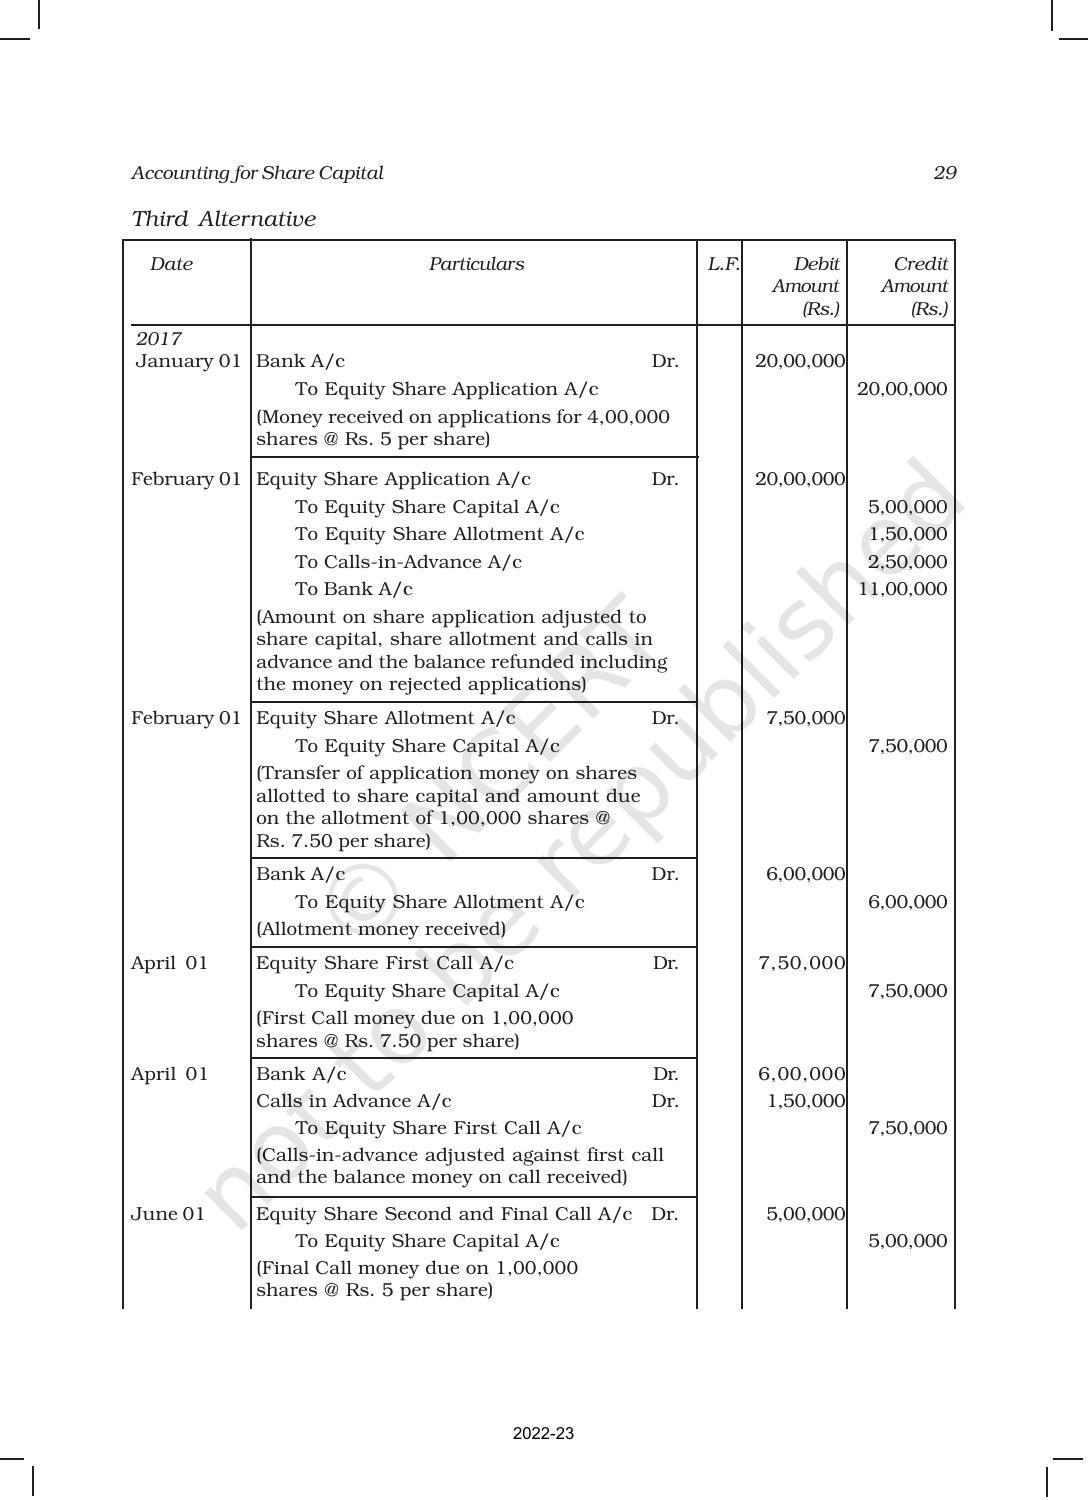 NCERT Book for Class 12 Accountancy Part II Chapter 1 Accounting for Share Capital - Page 29